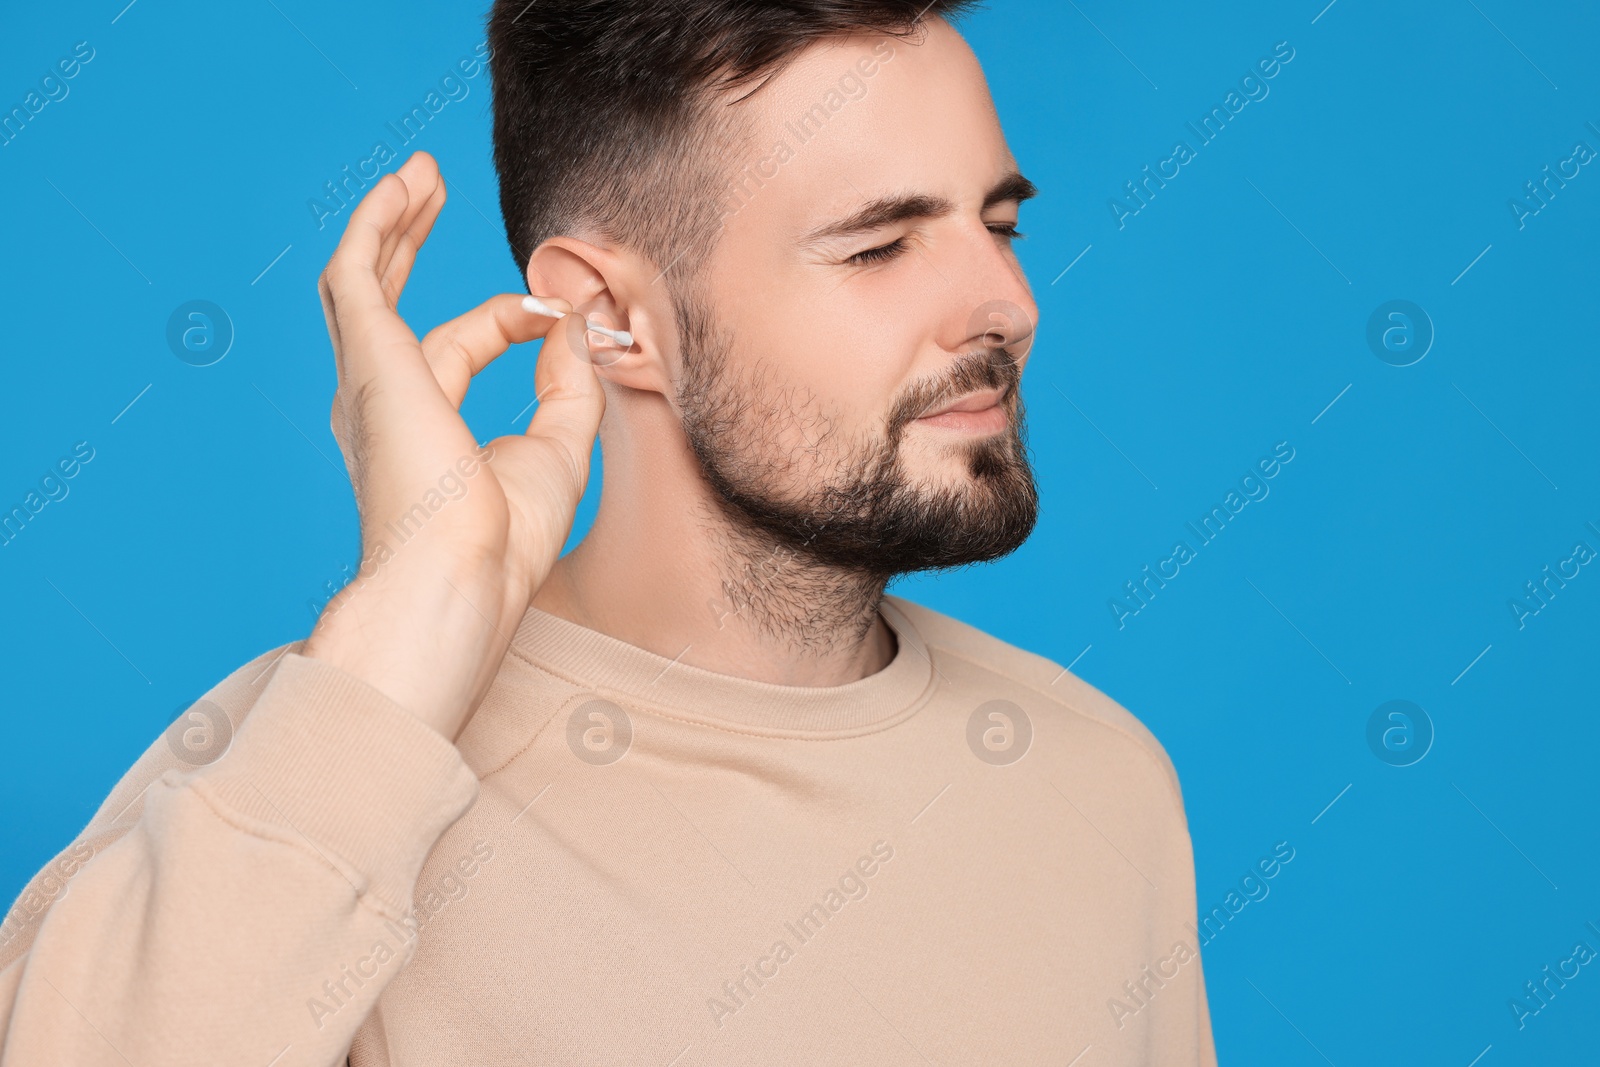 Photo of Young man cleaning ear with cotton swab on light blue background